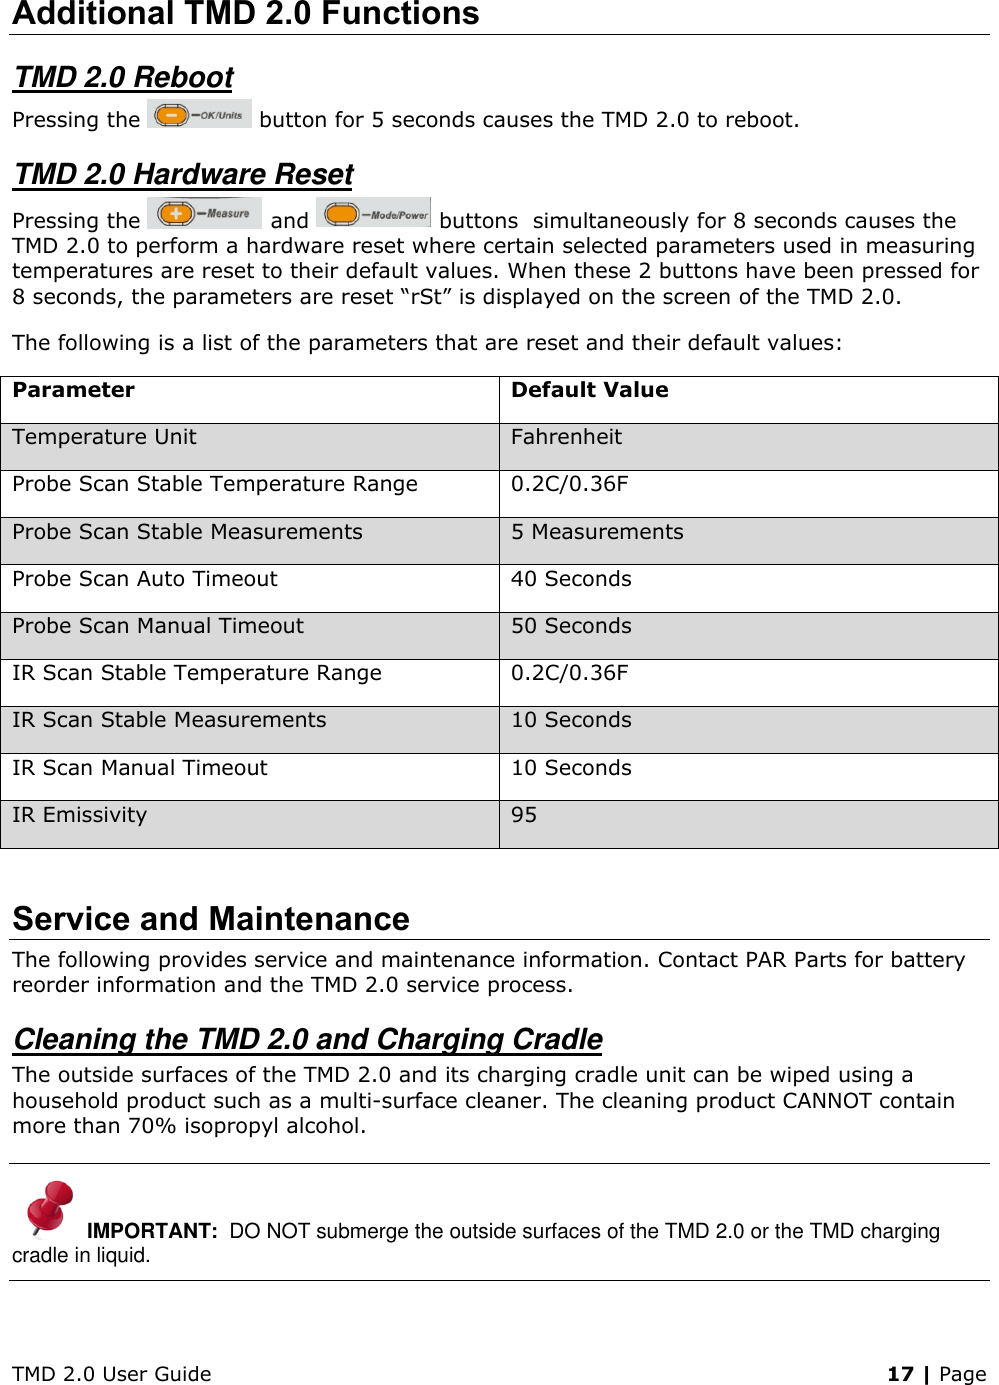 TMD 2.0 User Guide    17 | Page Additional TMD 2.0 Functions TMD 2.0 Reboot Pressing the   button for 5 seconds causes the TMD 2.0 to reboot. TMD 2.0 Hardware Reset Pressing the   and   buttons  simultaneously for 8 seconds causes the TMD 2.0 to perform a hardware reset where certain selected parameters used in measuring temperatures are reset to their default values. When these 2 buttons have been pressed for 8 seconds, the parameters are reset “rSt” is displayed on the screen of the TMD 2.0.  The following is a list of the parameters that are reset and their default values: Parameter Default Value Temperature Unit Fahrenheit Probe Scan Stable Temperature Range 0.2C/0.36F Probe Scan Stable Measurements 5 Measurements Probe Scan Auto Timeout 40 Seconds Probe Scan Manual Timeout 50 Seconds IR Scan Stable Temperature Range 0.2C/0.36F  IR Scan Stable Measurements 10 Seconds IR Scan Manual Timeout 10 Seconds IR Emissivity  95   Service and Maintenance The following provides service and maintenance information. Contact PAR Parts for battery reorder information and the TMD 2.0 service process. Cleaning the TMD 2.0 and Charging Cradle The outside surfaces of the TMD 2.0 and its charging cradle unit can be wiped using a household product such as a multi-surface cleaner. The cleaning product CANNOT contain more than 70% isopropyl alcohol. IMPORTANT:  DO NOT submerge the outside surfaces of the TMD 2.0 or the TMD charging cradle in liquid. 